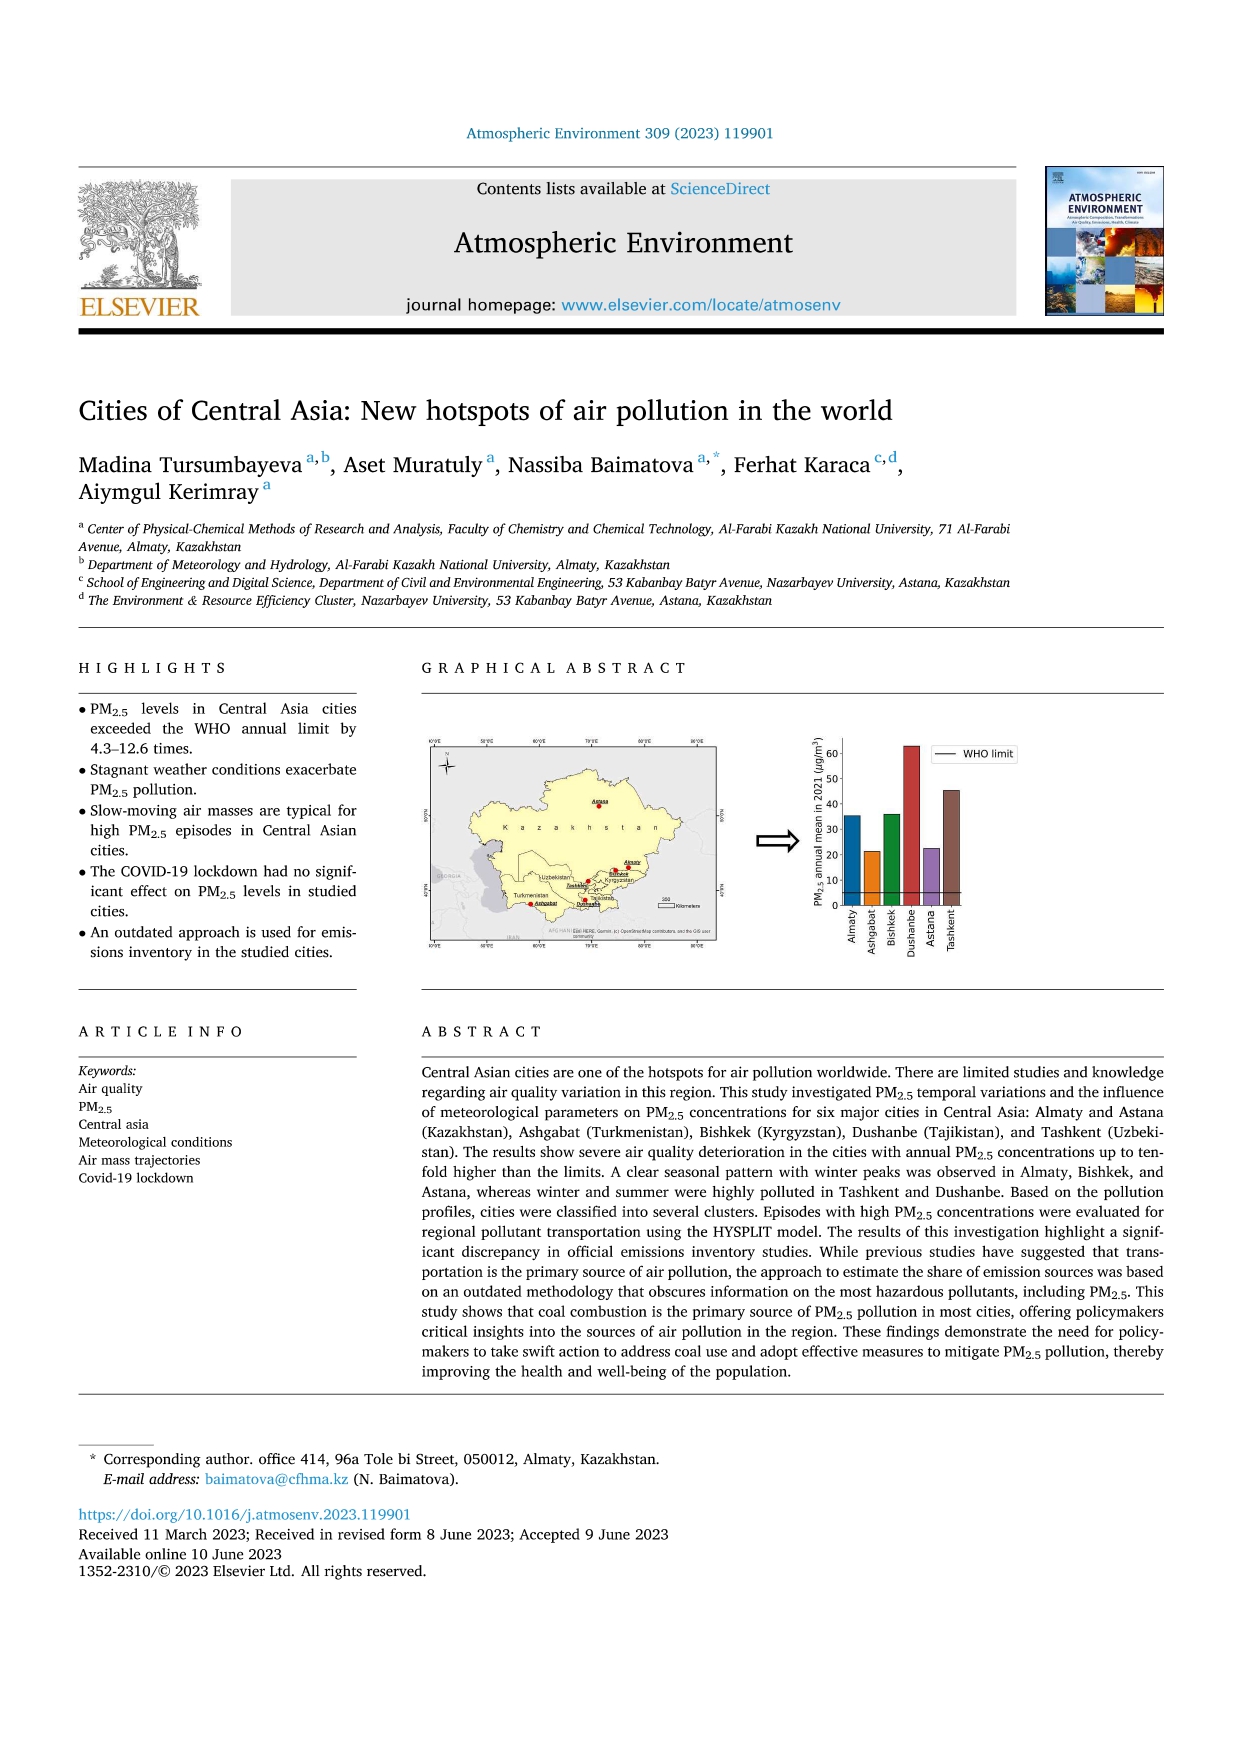 The article "Cities of Central Asia: New hotspots of air pollution in the world" has been published